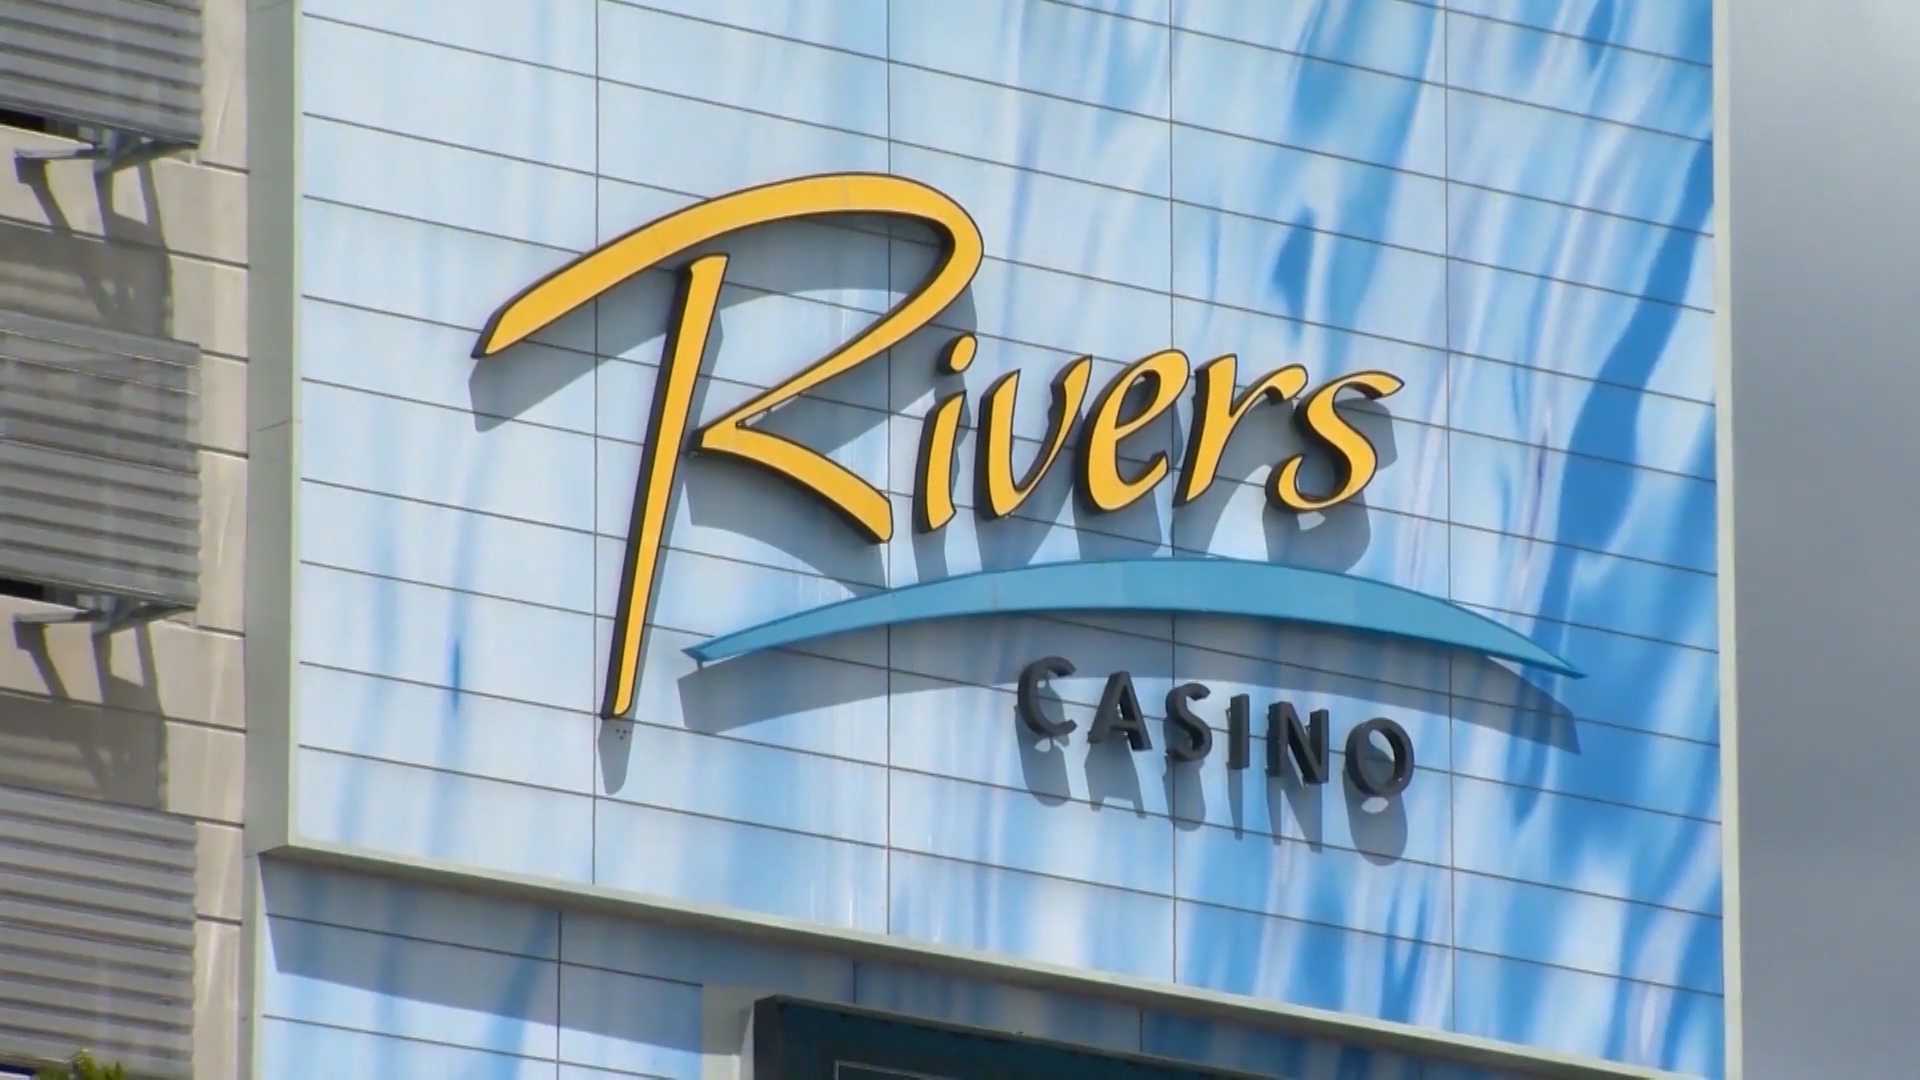 rivers casino cards or cash to play